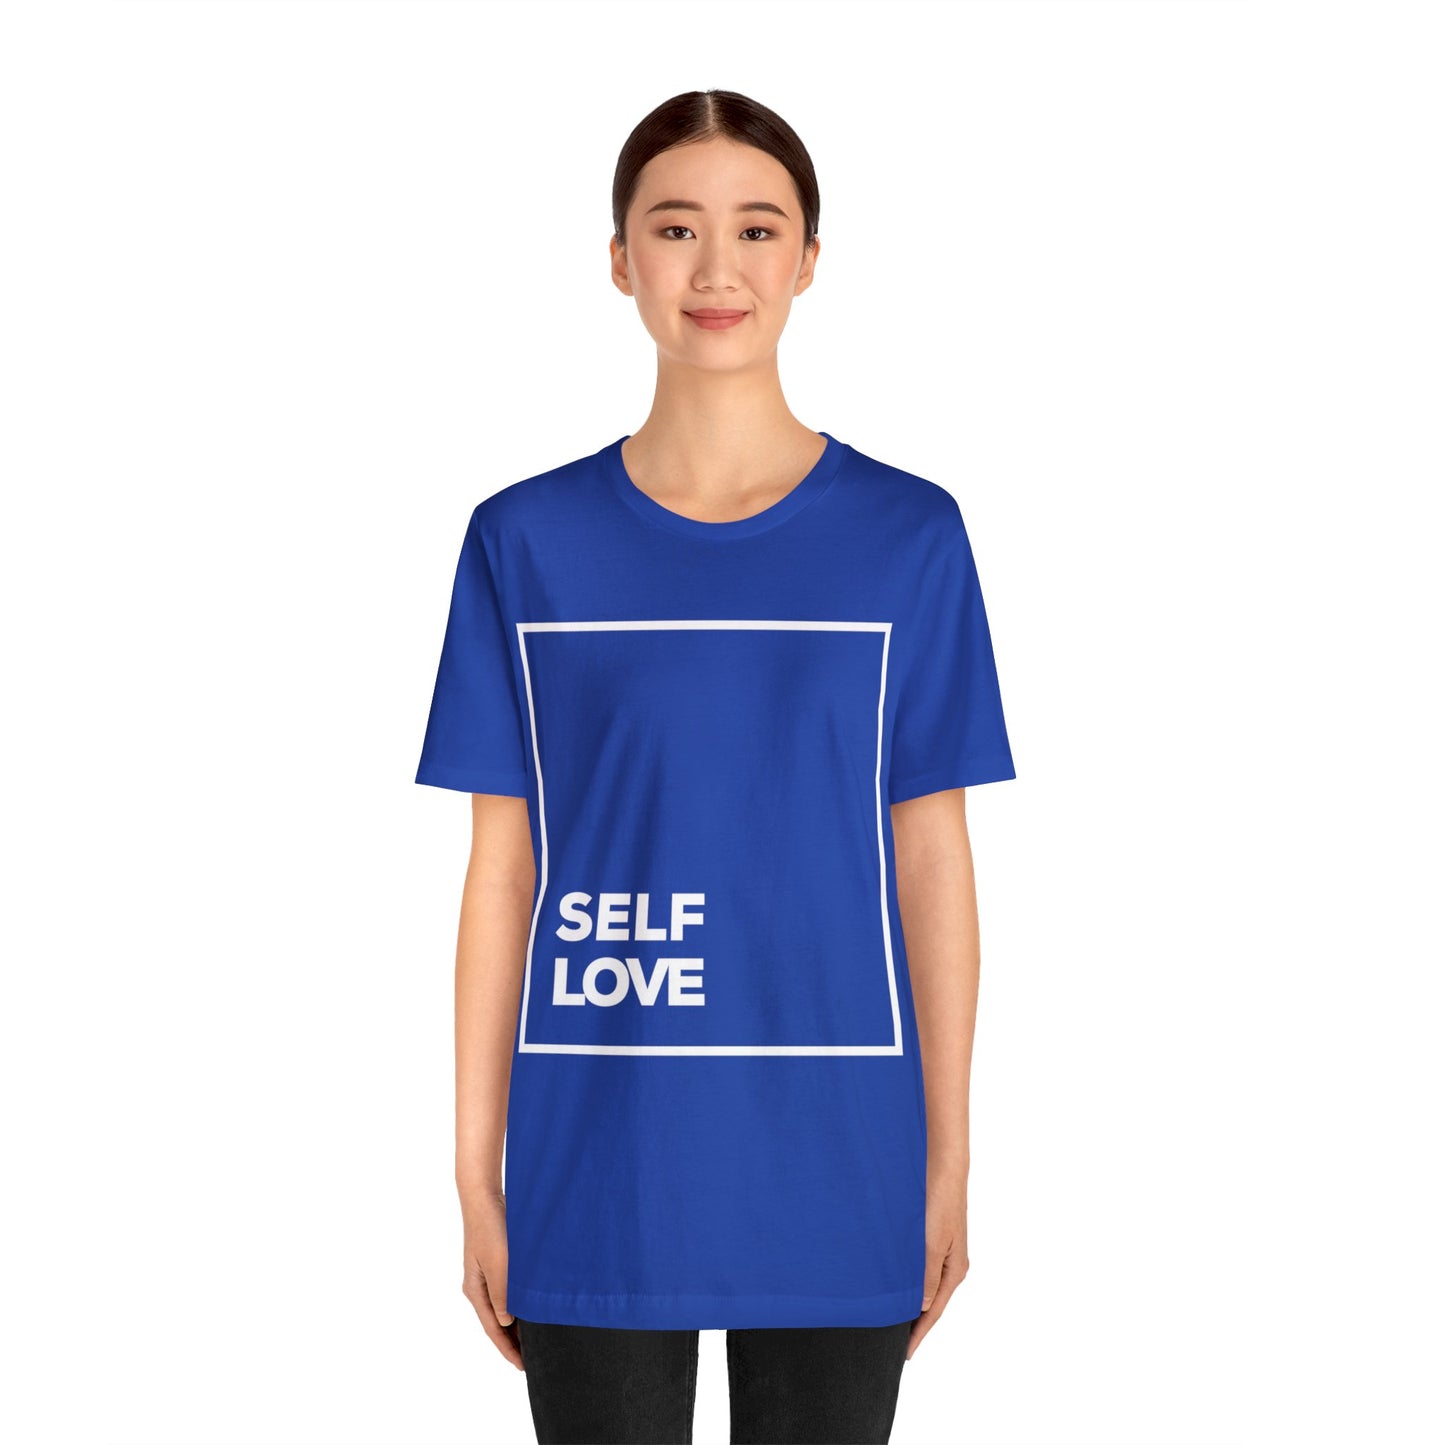 Self Love - Graphic T Shirt For Men and Women